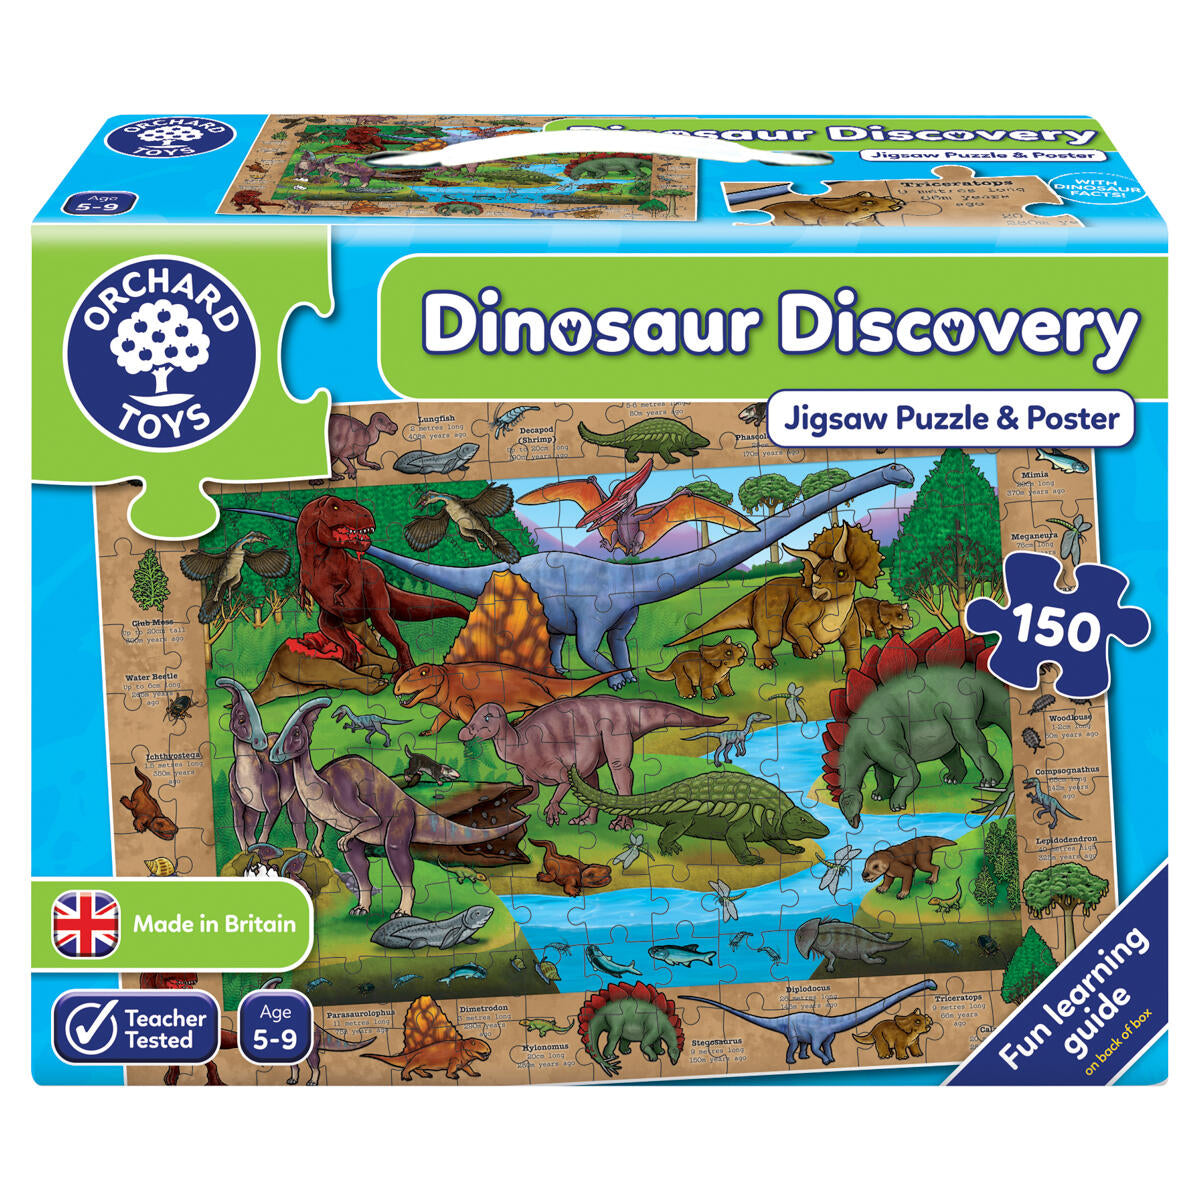  orchard toys dinosaur discovery jigsaw puzzle & poster 150 piece